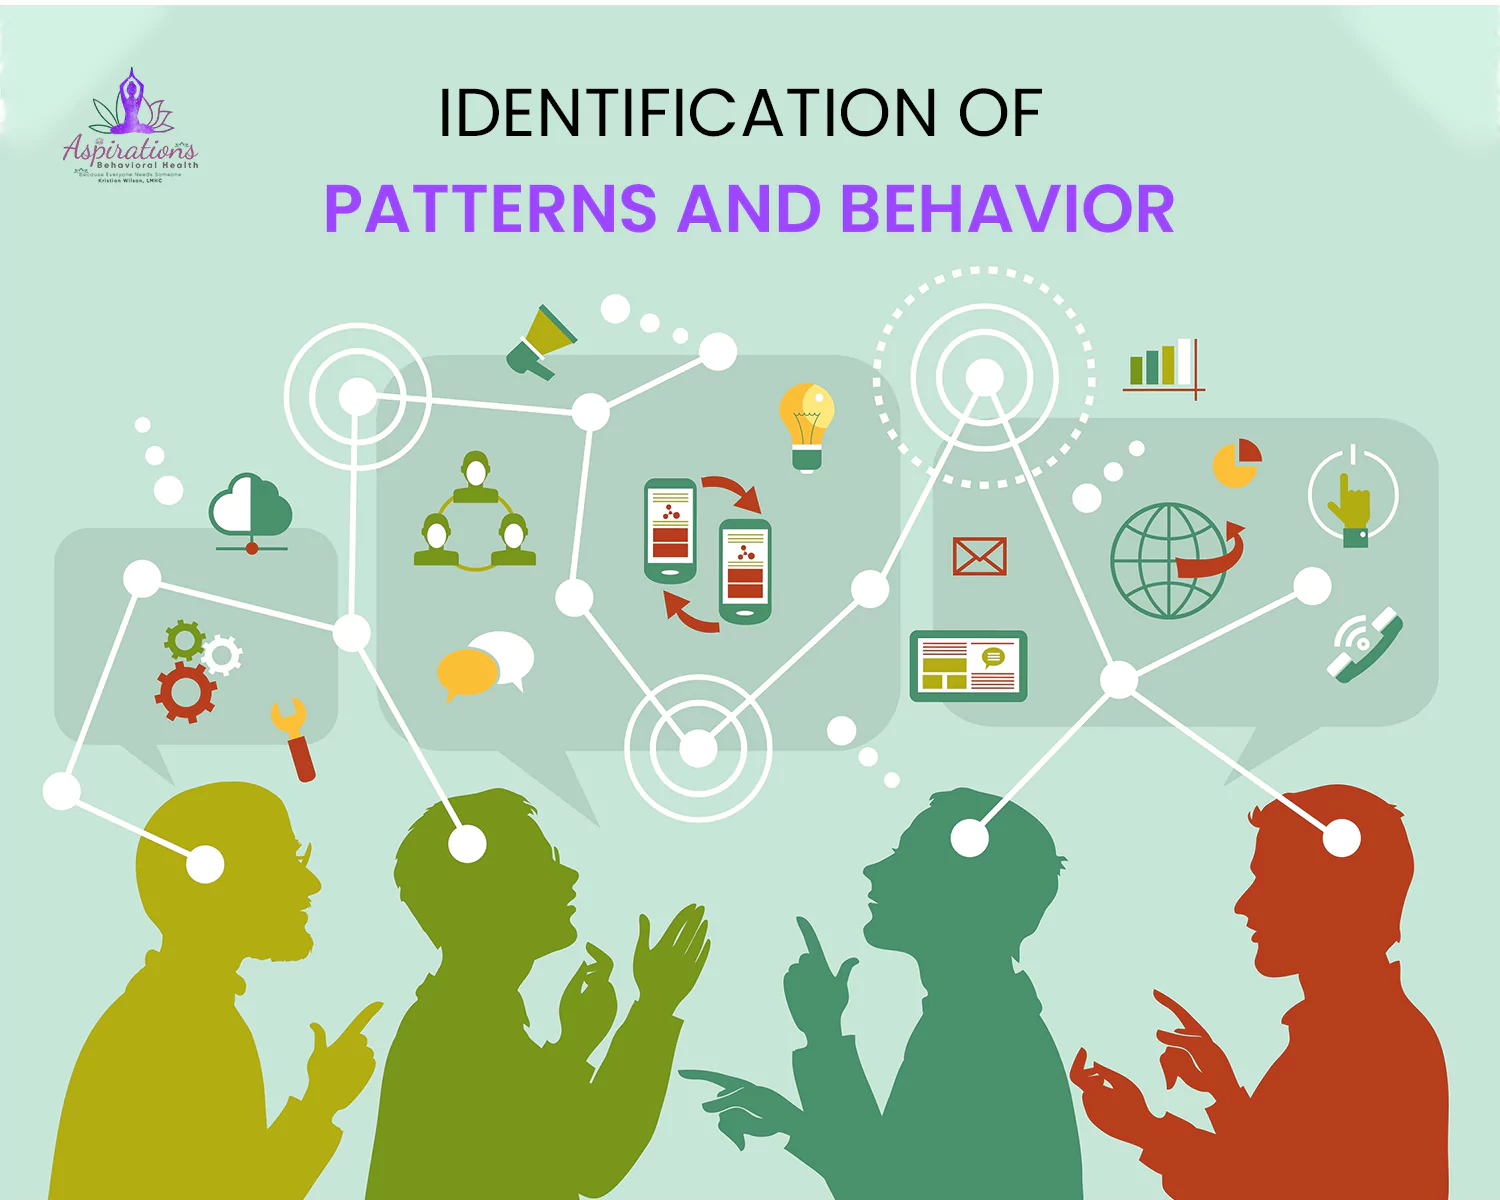 Identification of Patterns and Behavior